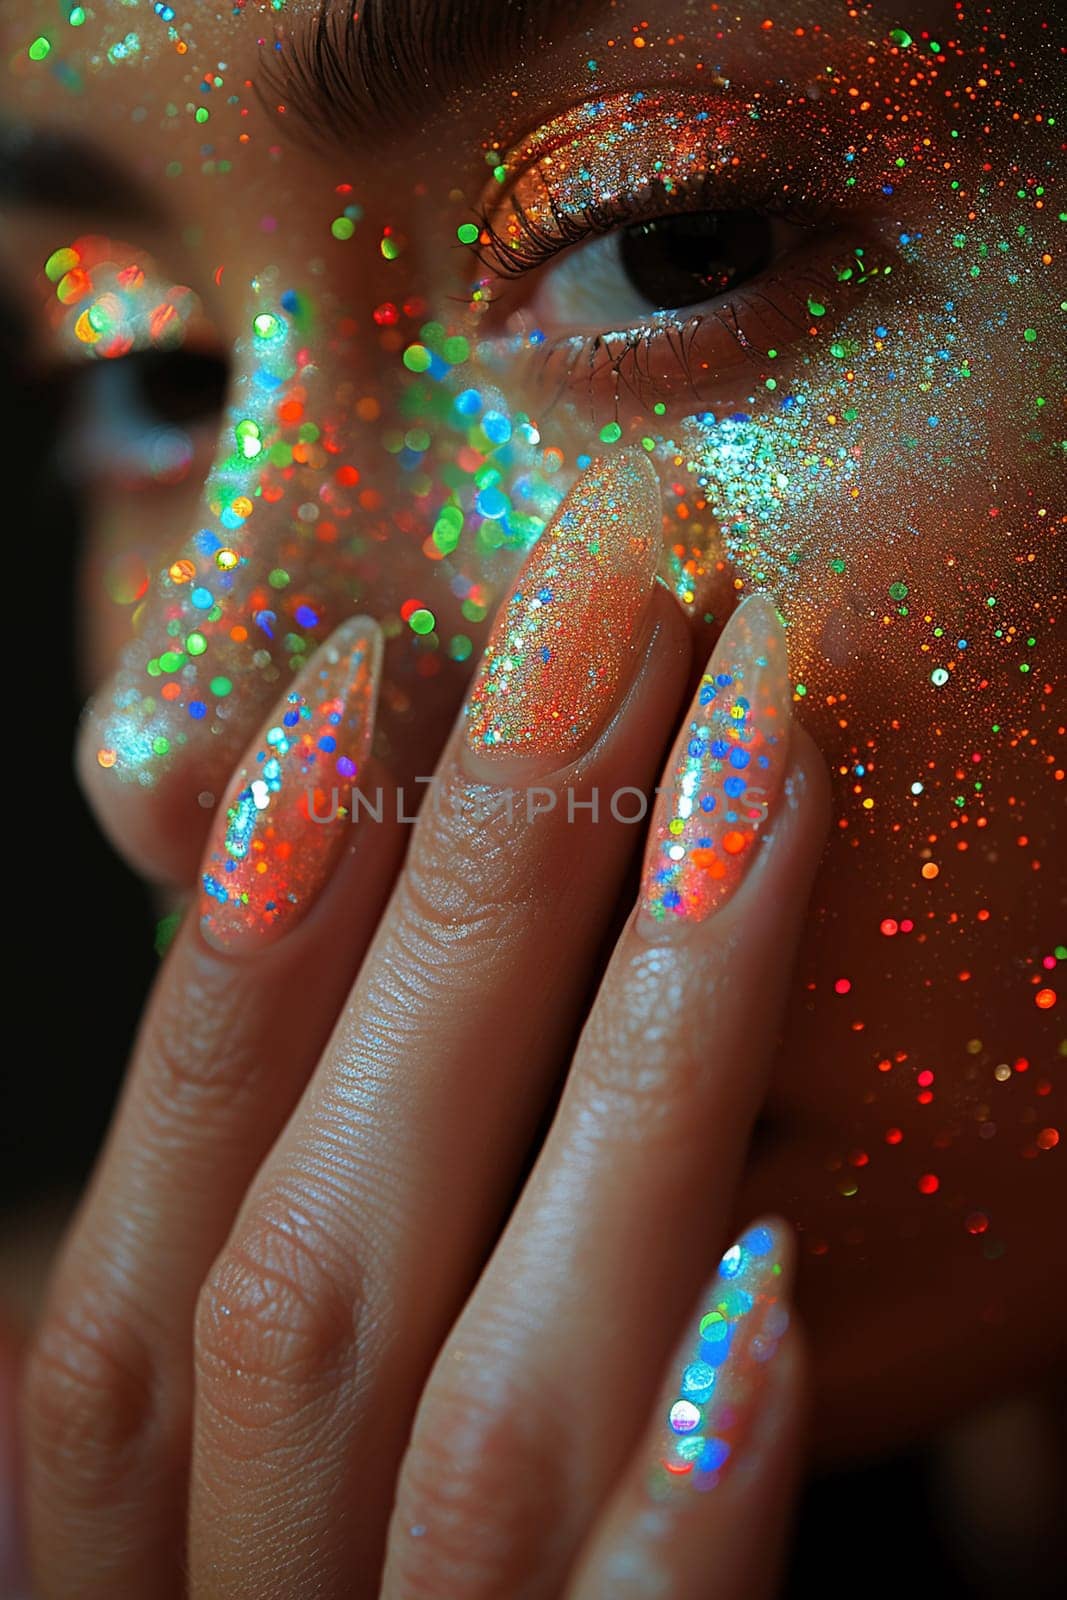 Close-up of hand with glittery nail art, showcasing creative beauty and fashion.